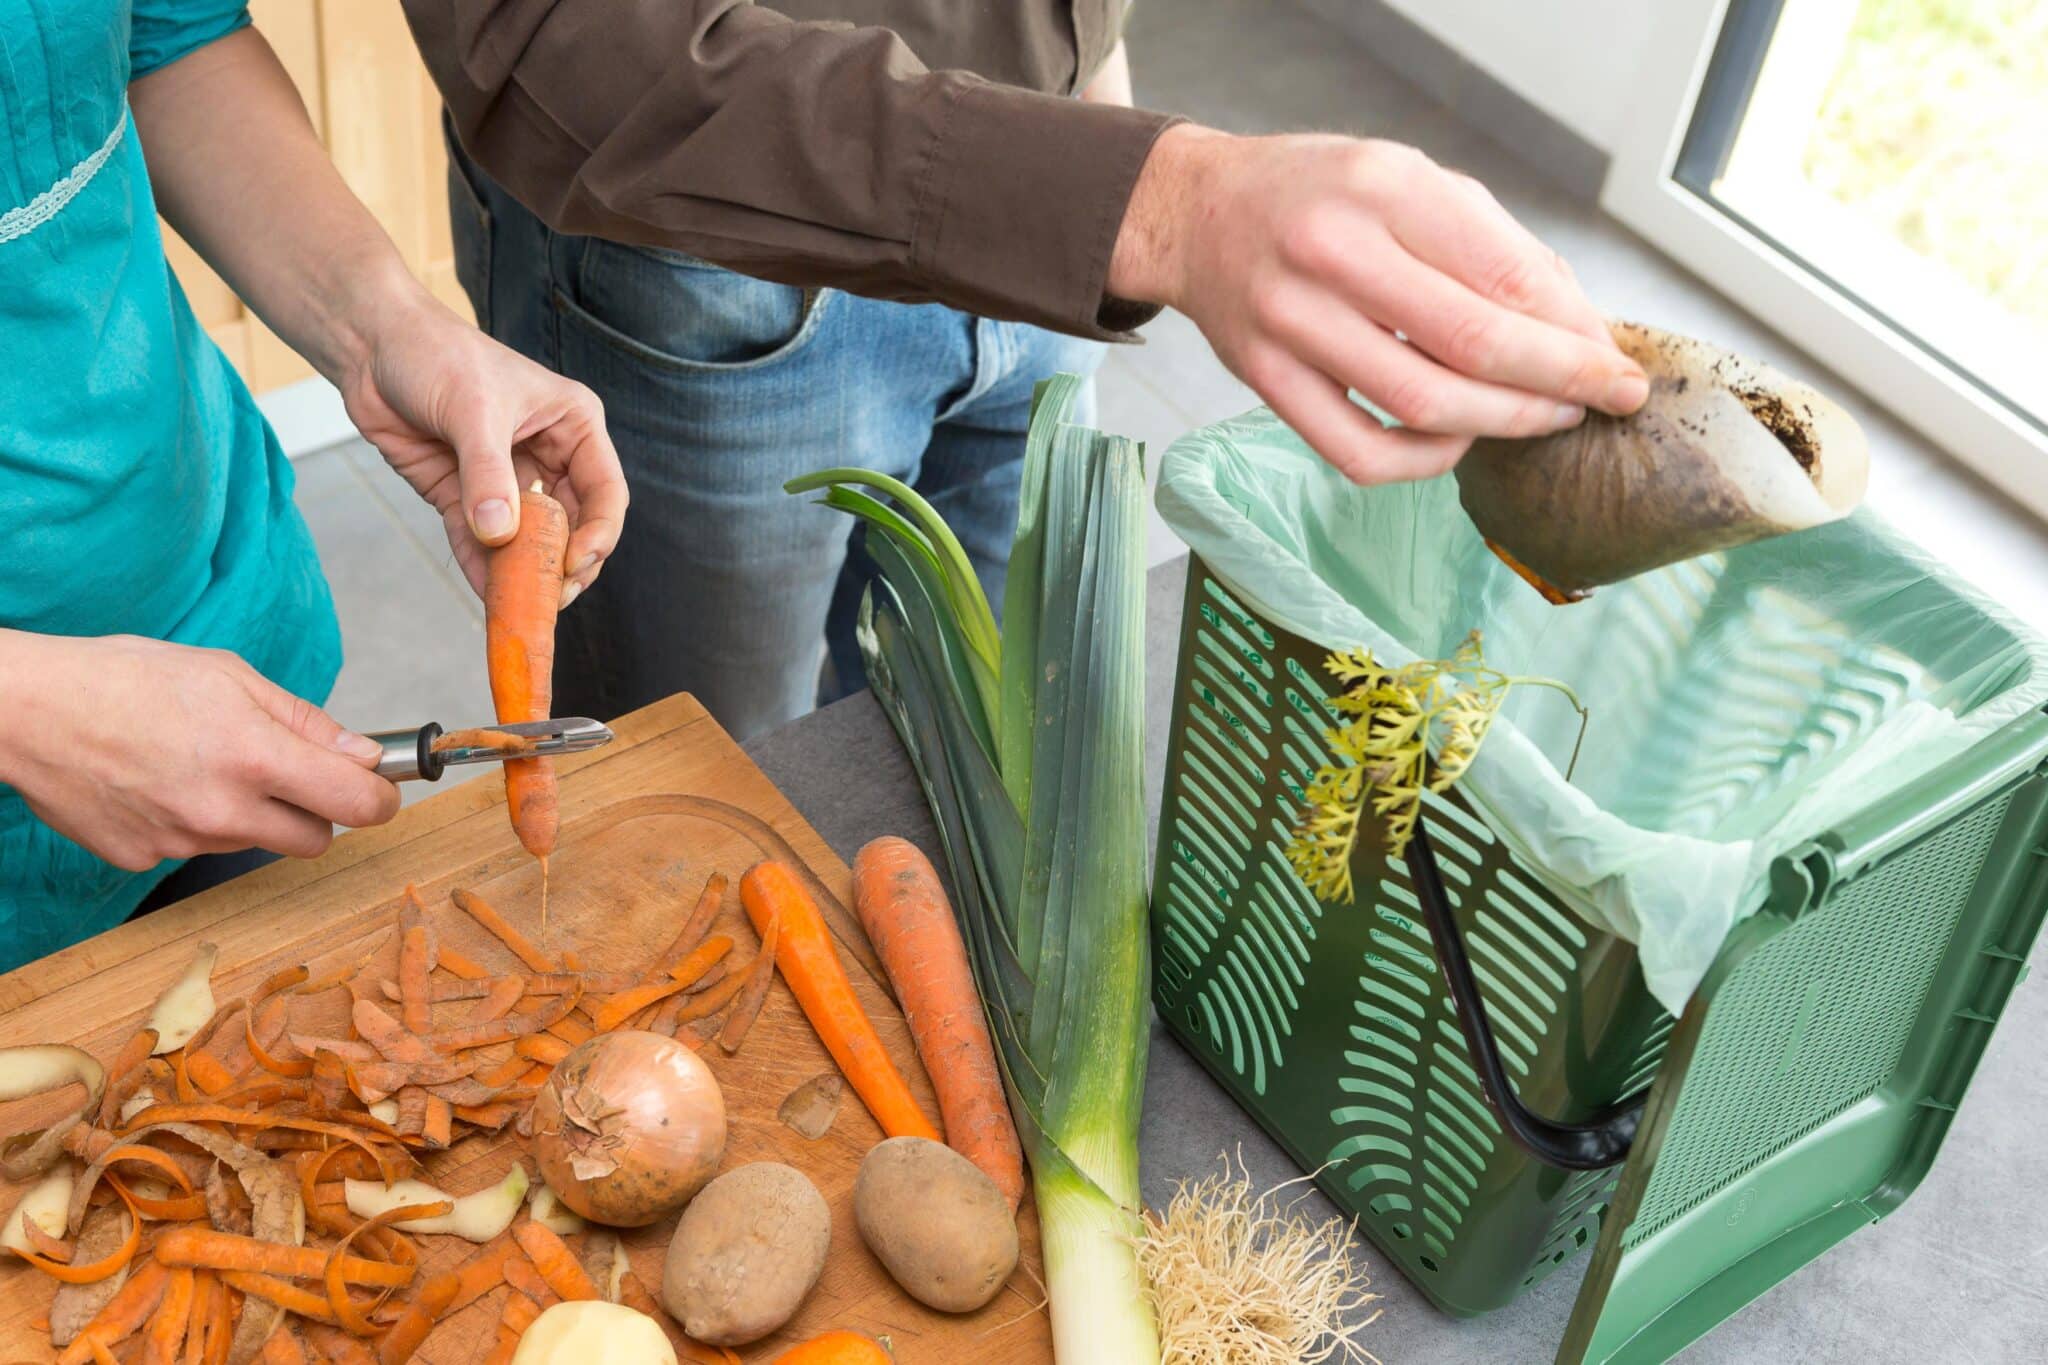 5 Best Kitchen Compost Bins to Reduce Your Food Waste - EcoWatch